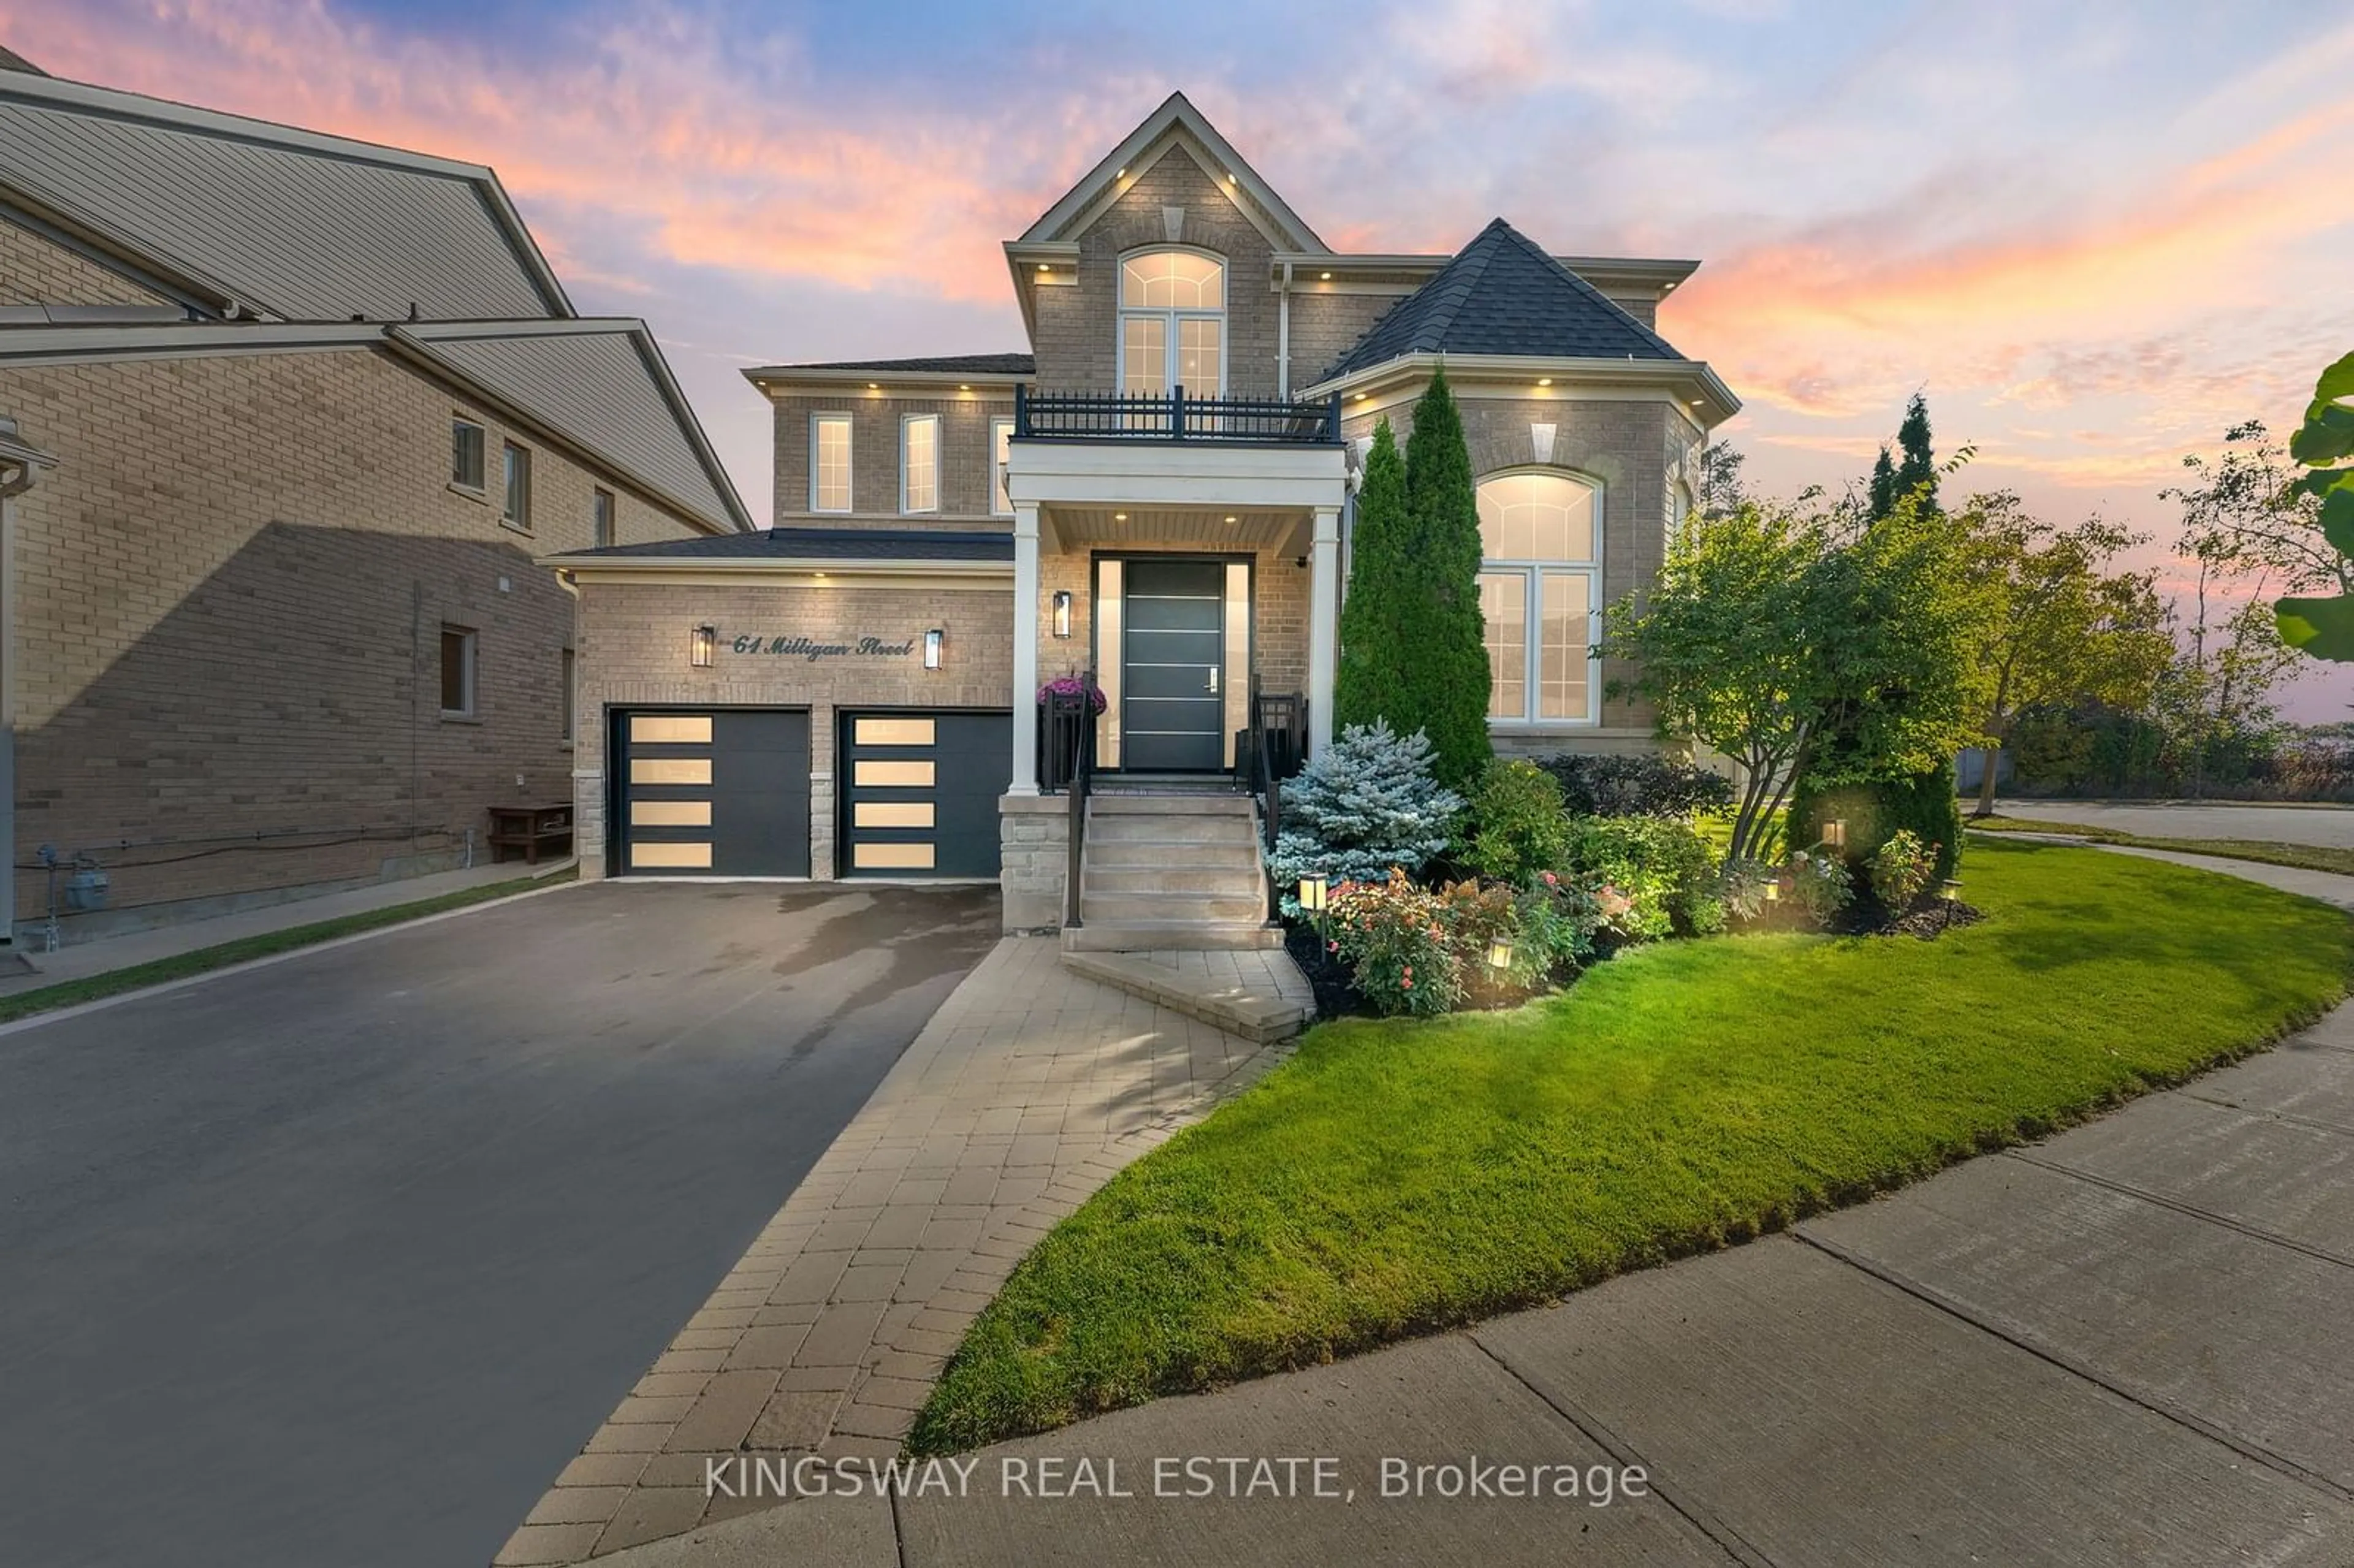 Frontside or backside of a home for 61 Milligan St, Bradford West Gwillimbury Ontario L3Z 0A4